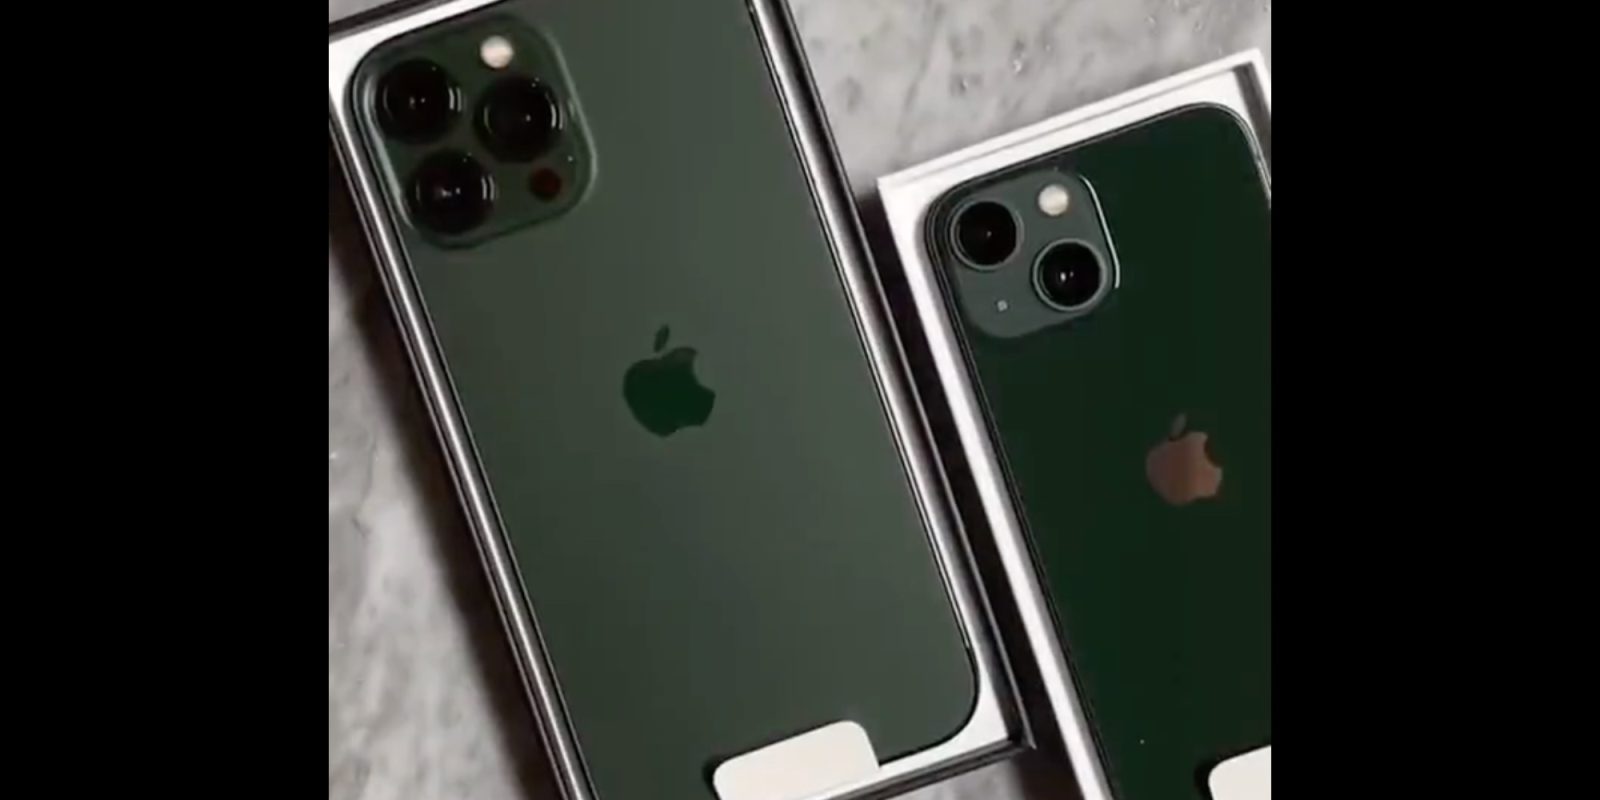 Hands-on video shows how green iPhone 13 and iPhone 13 Pro look in real  life [Video] - 9to5Mac